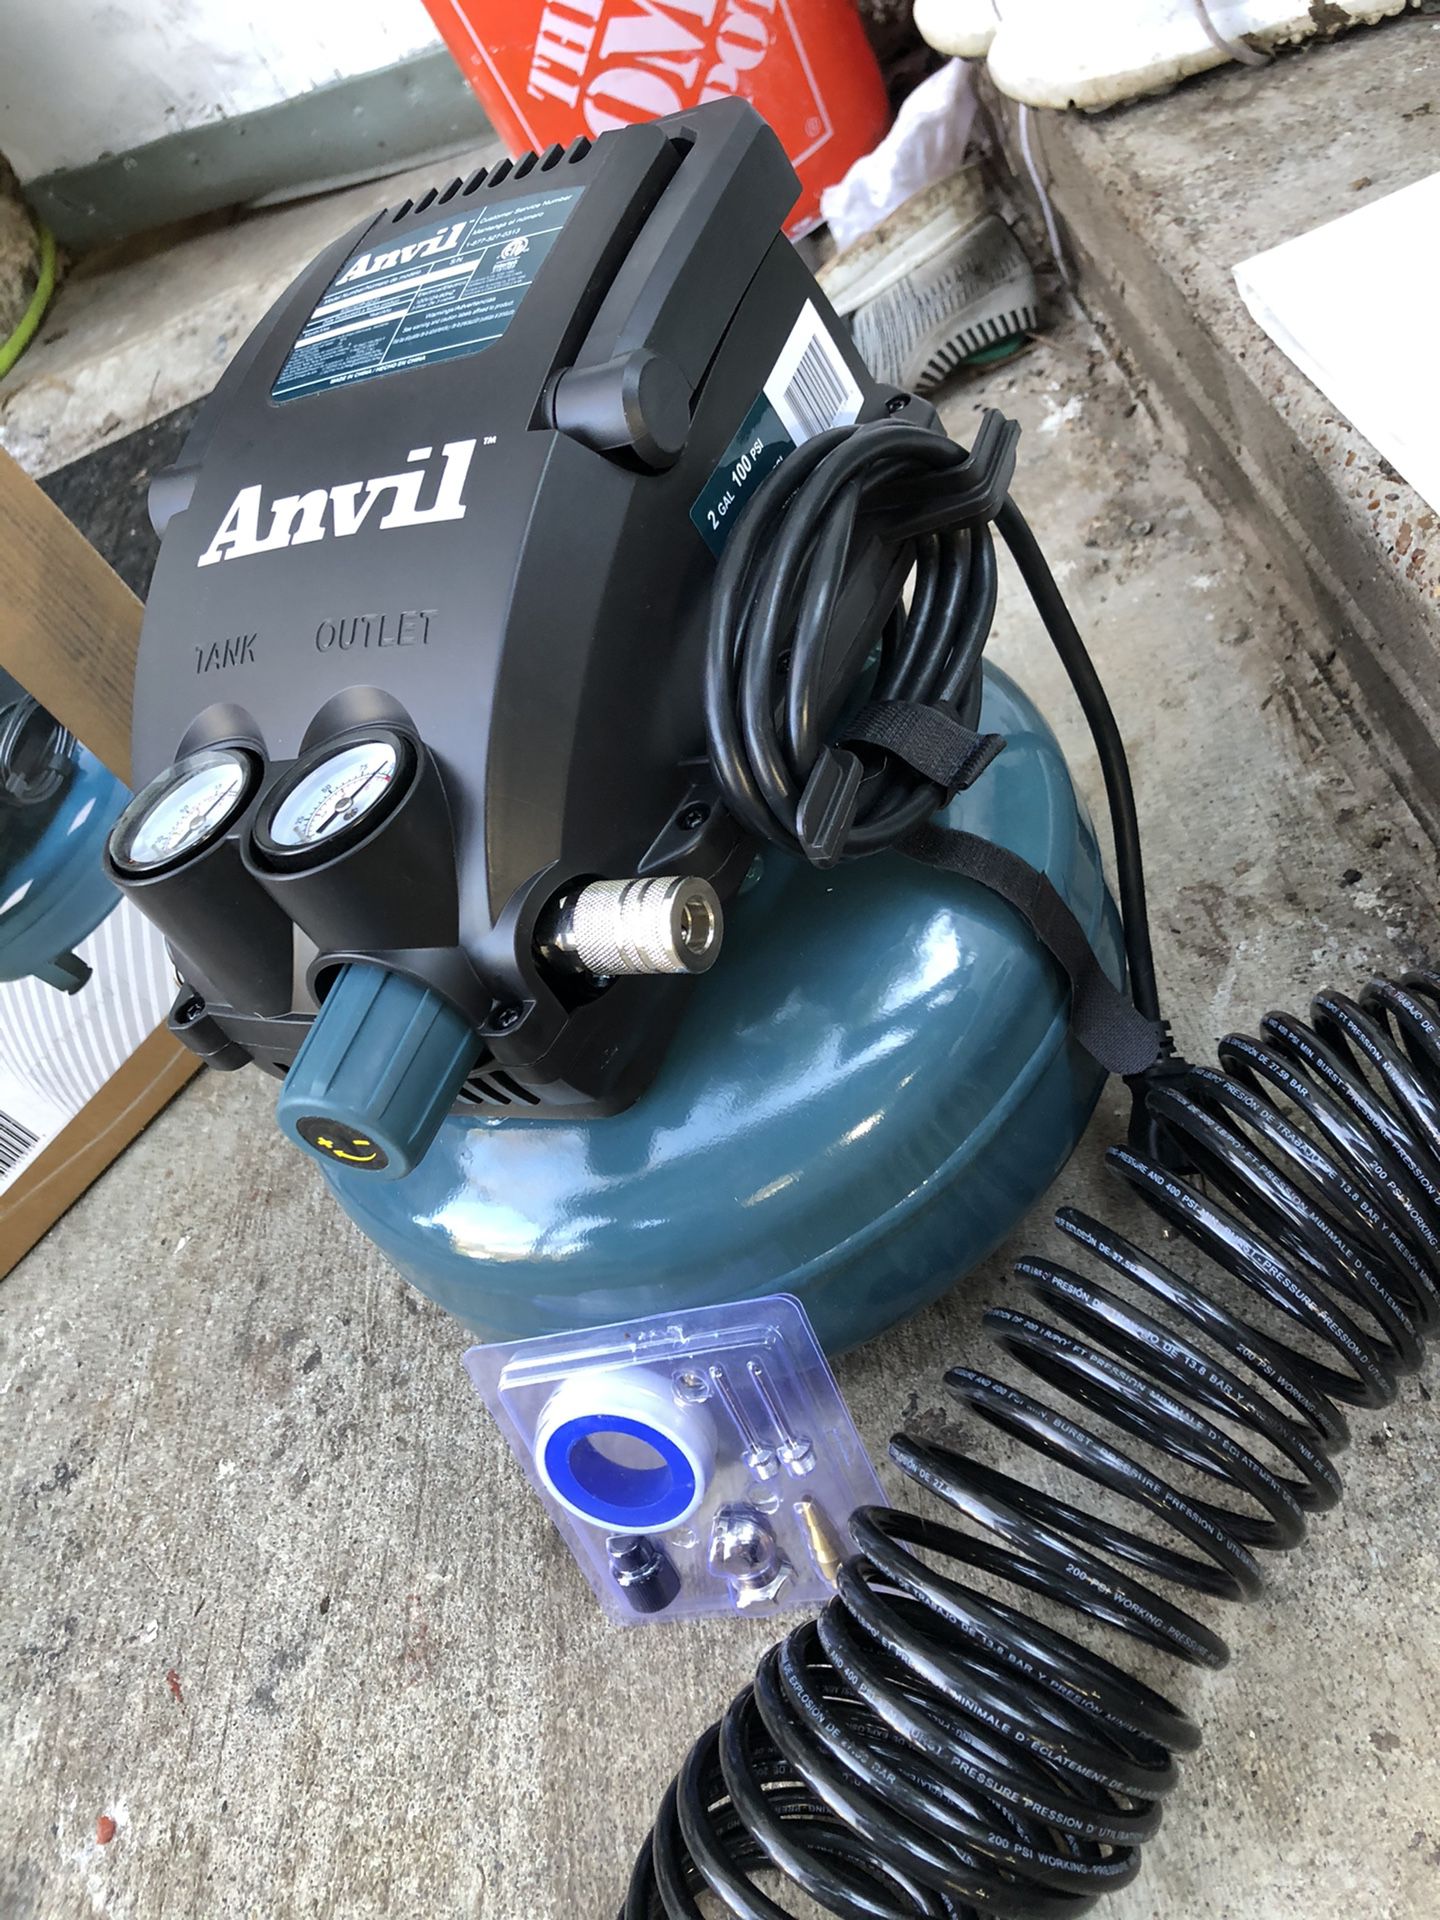 Anvil 2 gal pancake air compressor with accessory kit